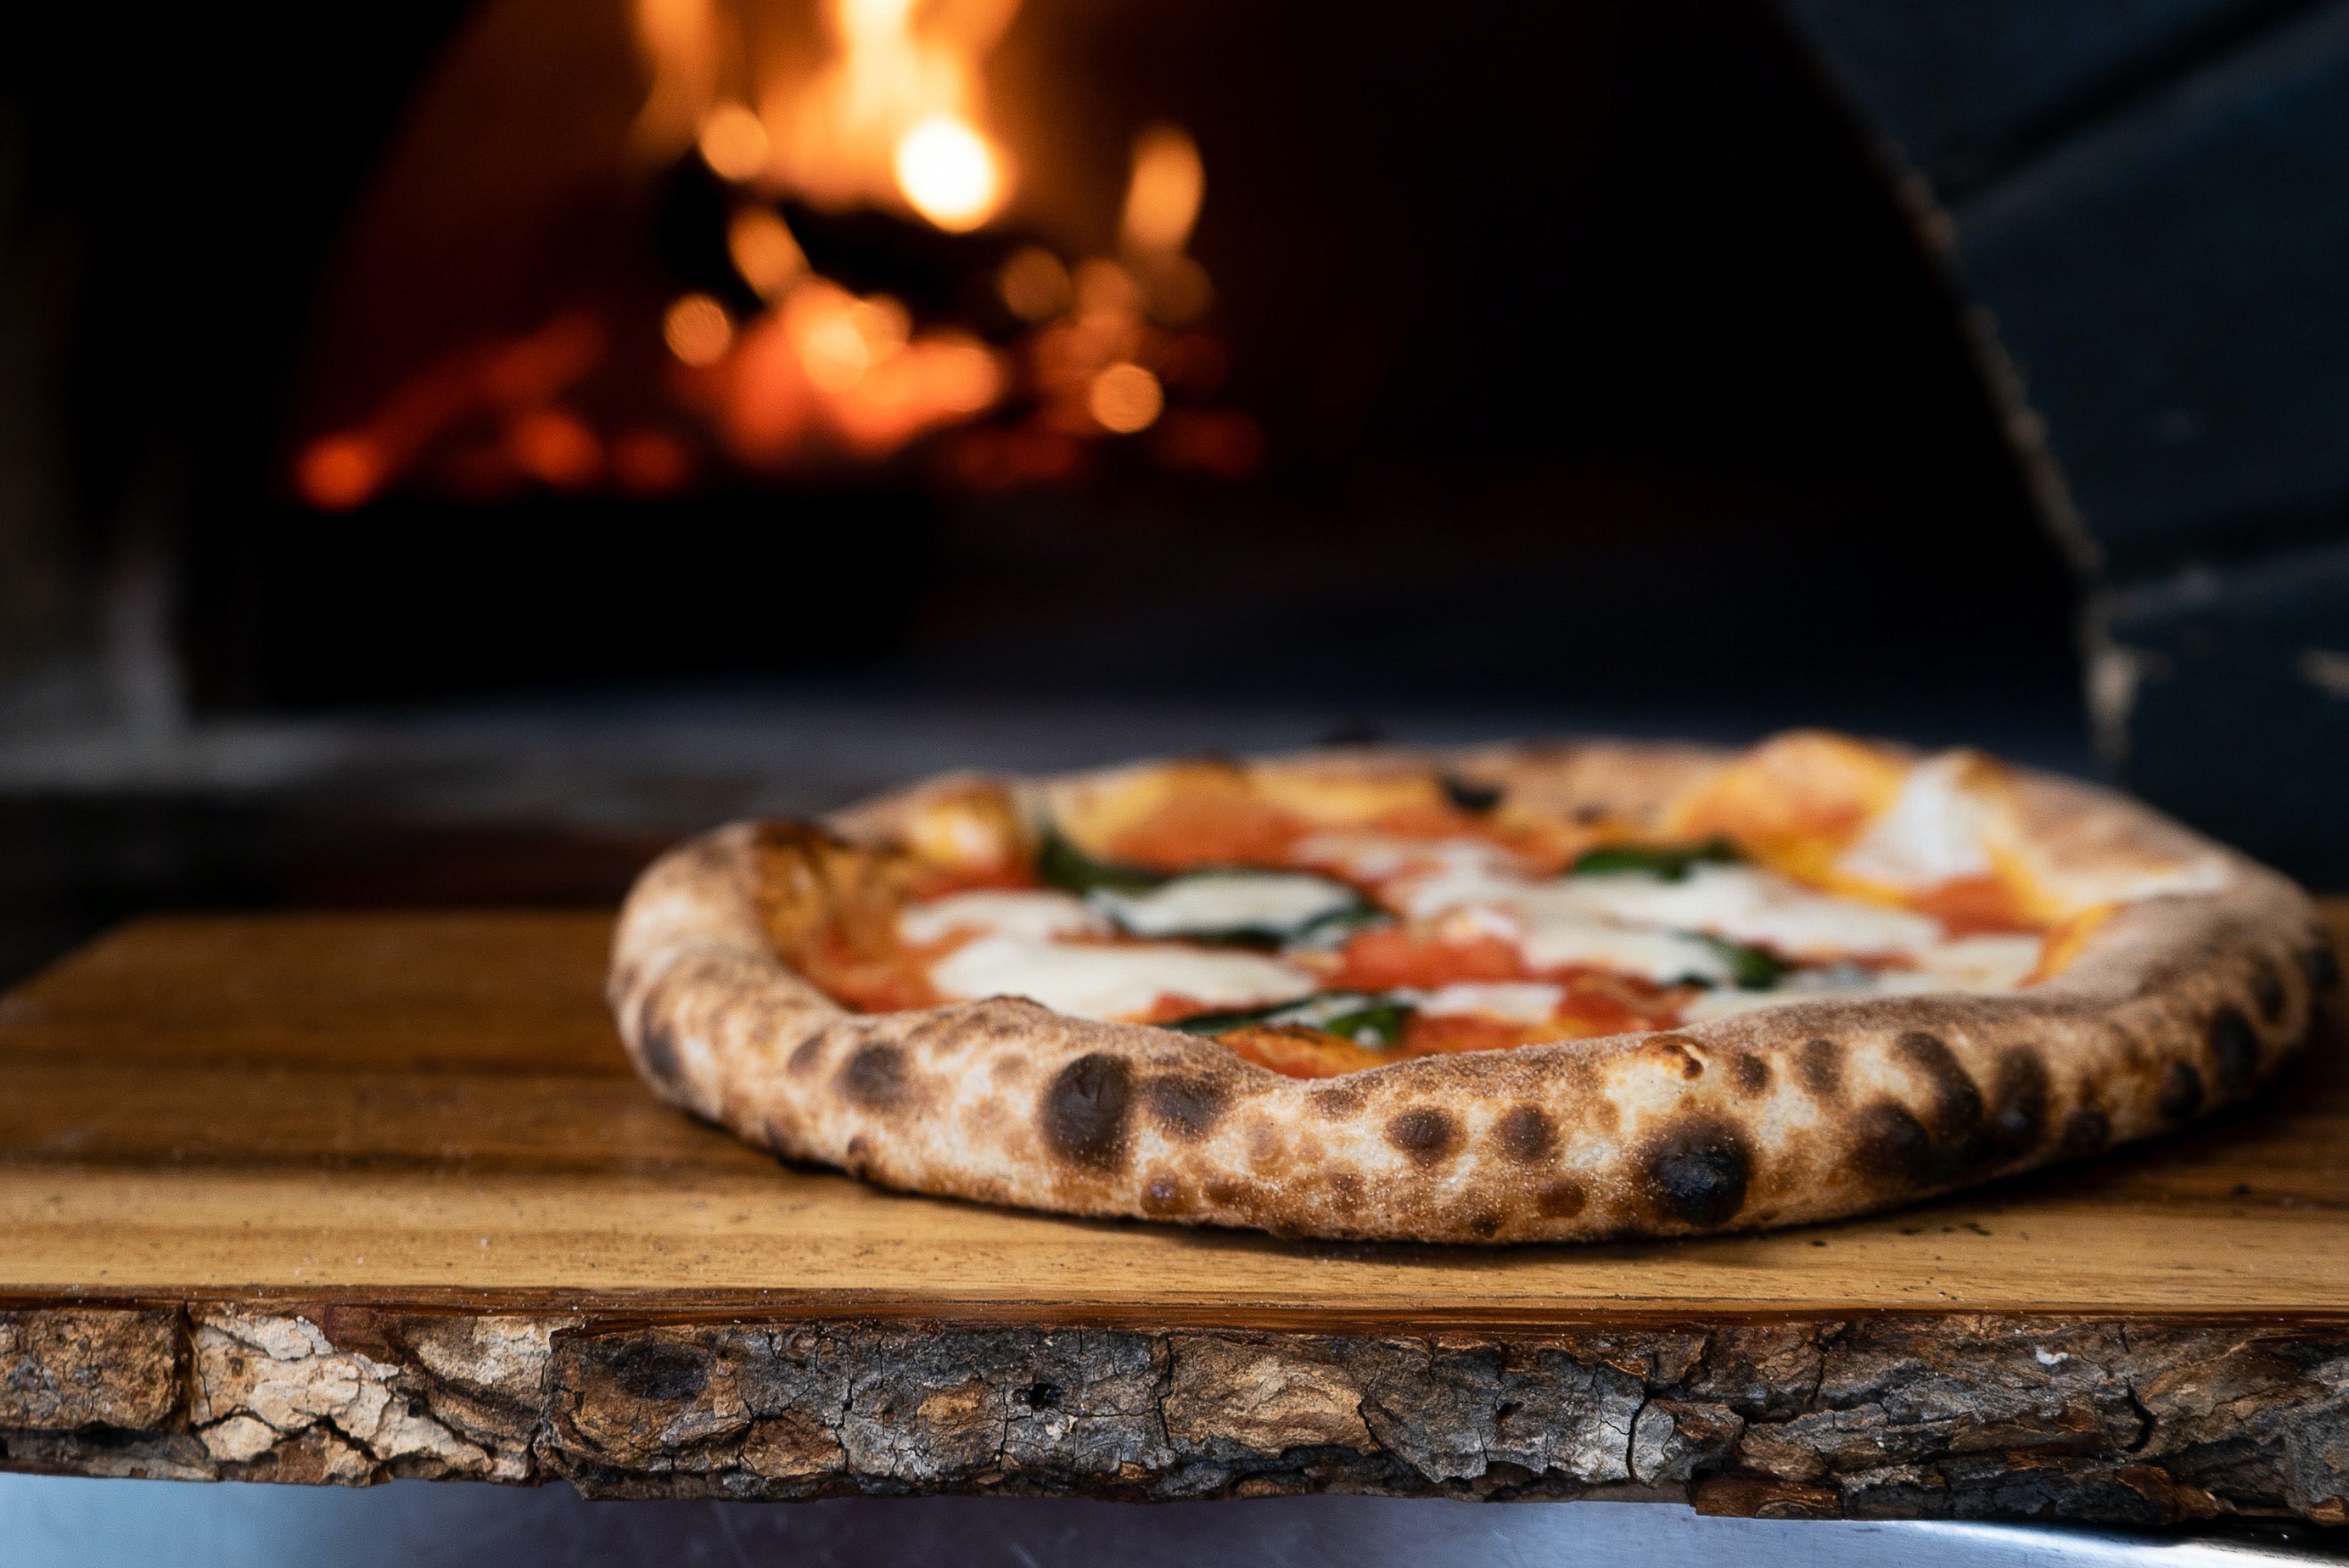 Can you make REAL NY Pizza In the Ninja Woodfire Outdoor Oven